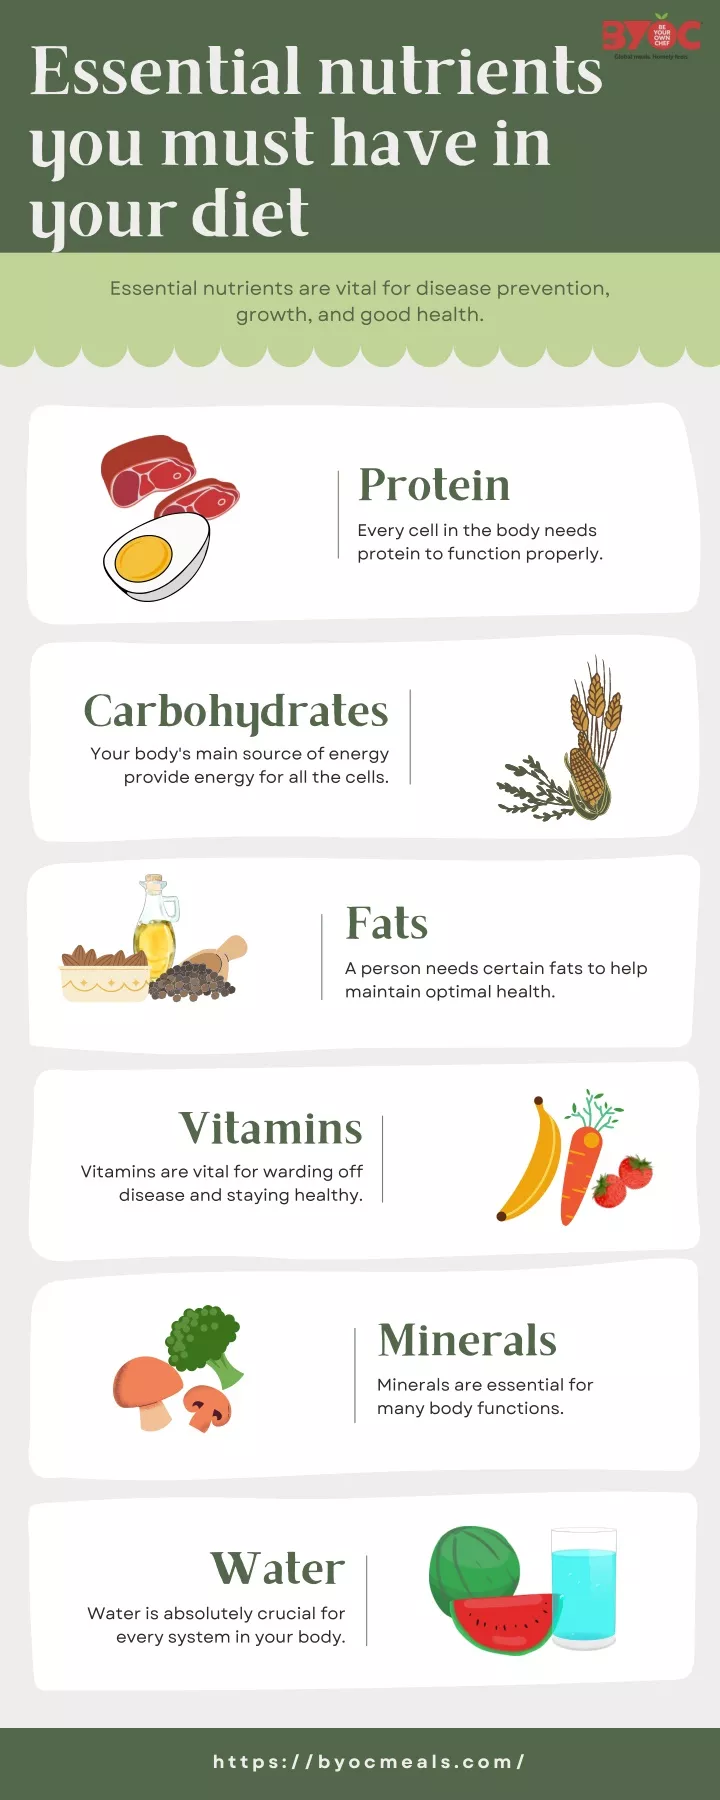 essential nutrients you must have in your diet